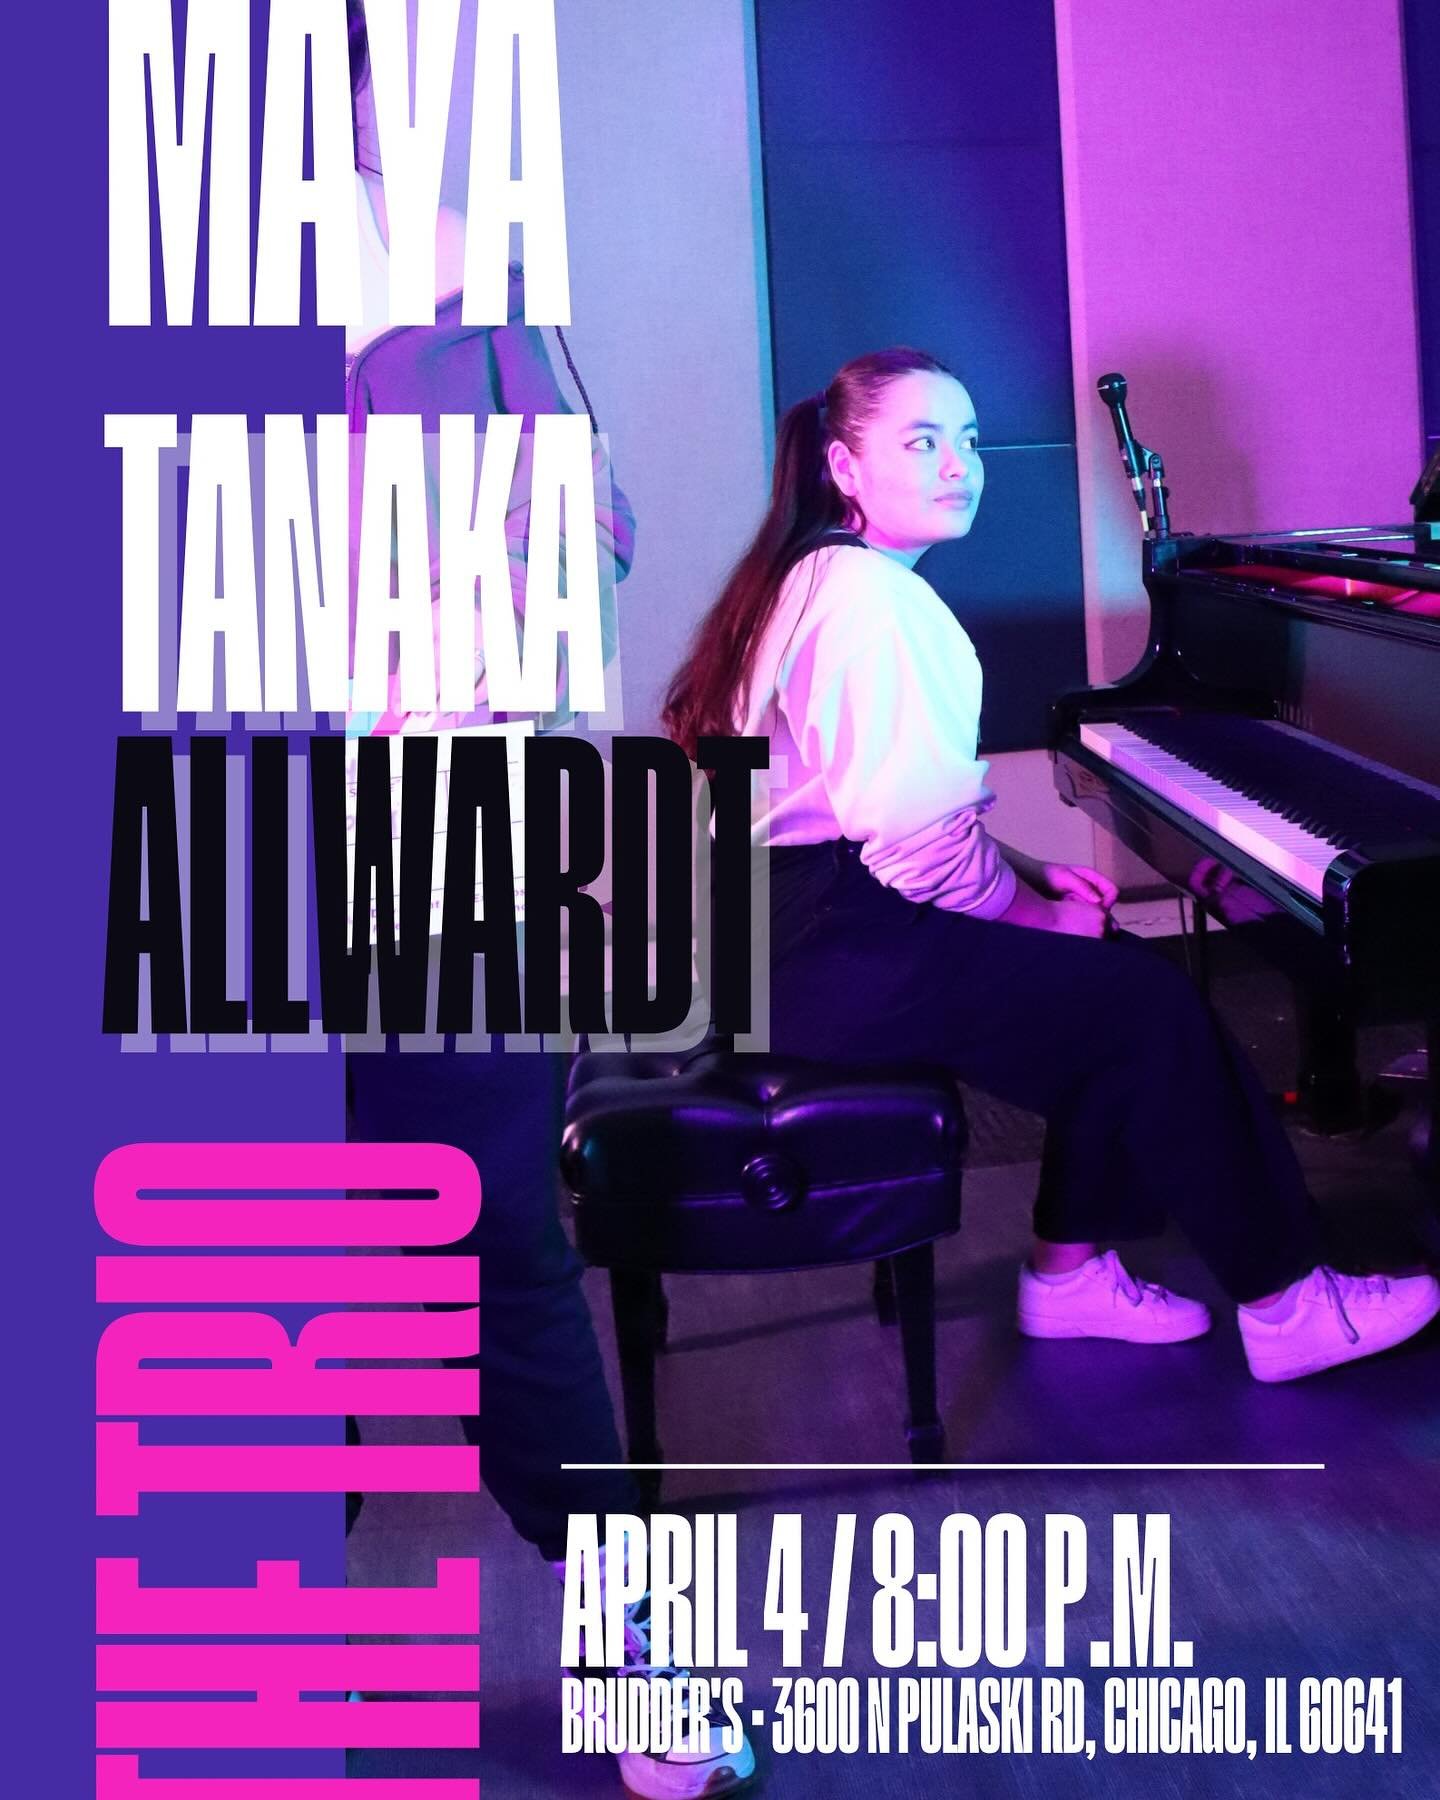 hey there!! I&rsquo;ll be playing with my trio this Thursday, April 4, At Brudder&rsquo;s! Playing tunes from Pilot as well as some new ones that will be on my summer album :)

Doors @ 7pm
Music @ 8pm

🥁 @_p_man13_ 
🎸@_ethandavila

#music #piano #p